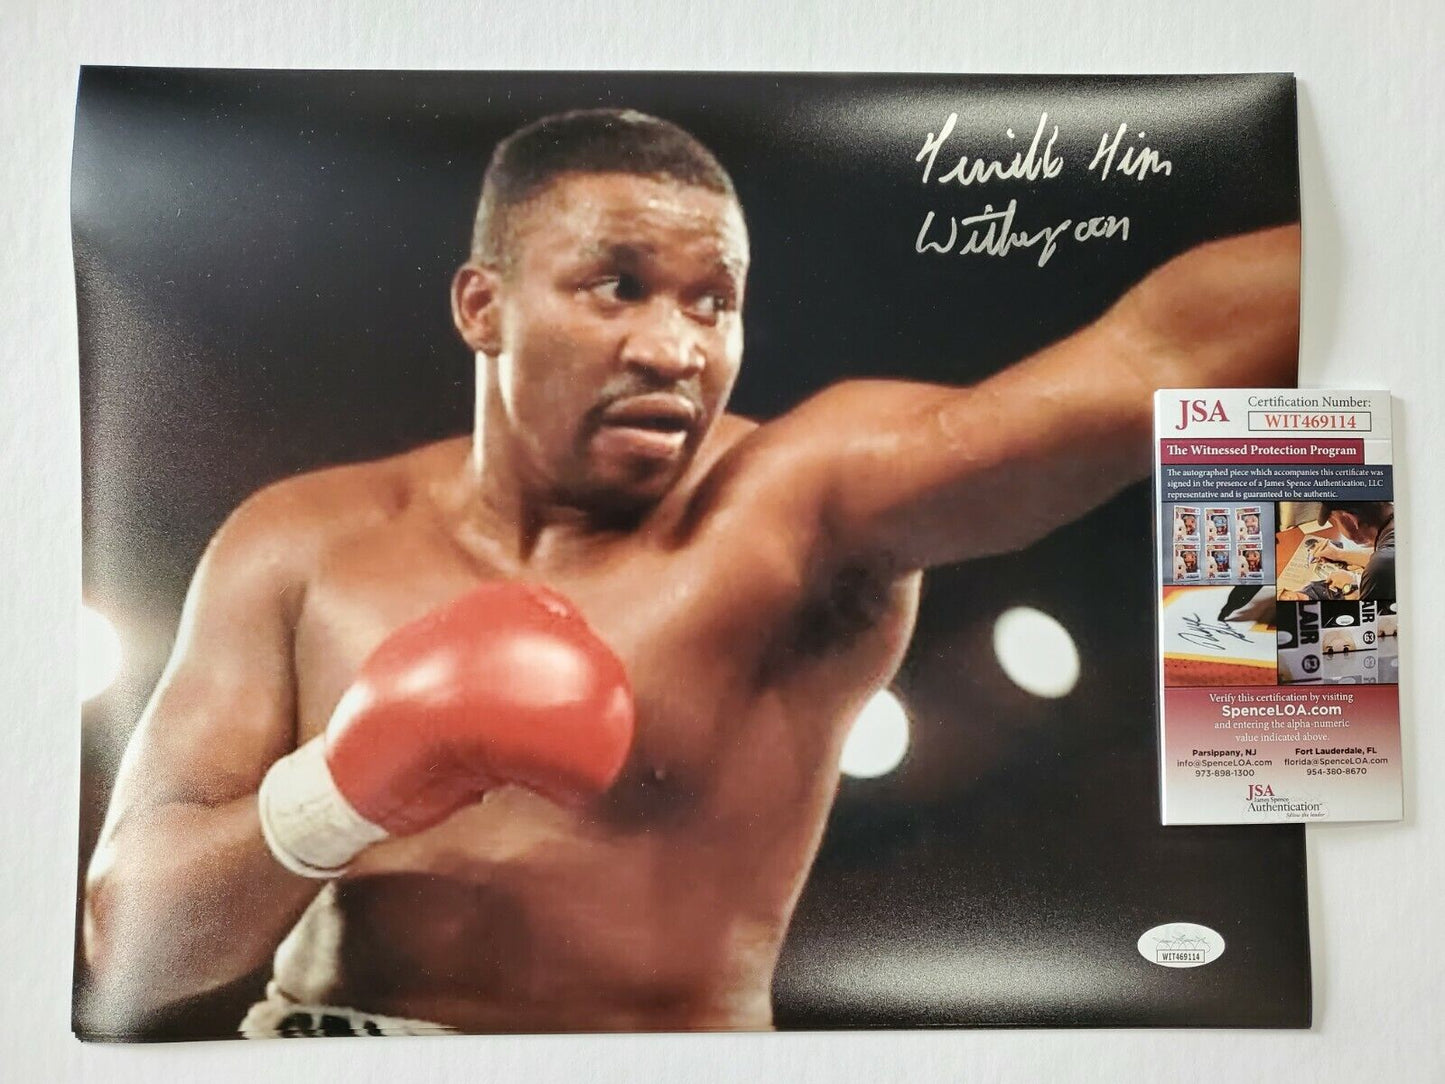 MVP Authentics "Terrible" Tim Witherspoon Autographed Signed Inscribed 11X14 Photo Jsa Coa 71.10 sports jersey framing , jersey framing